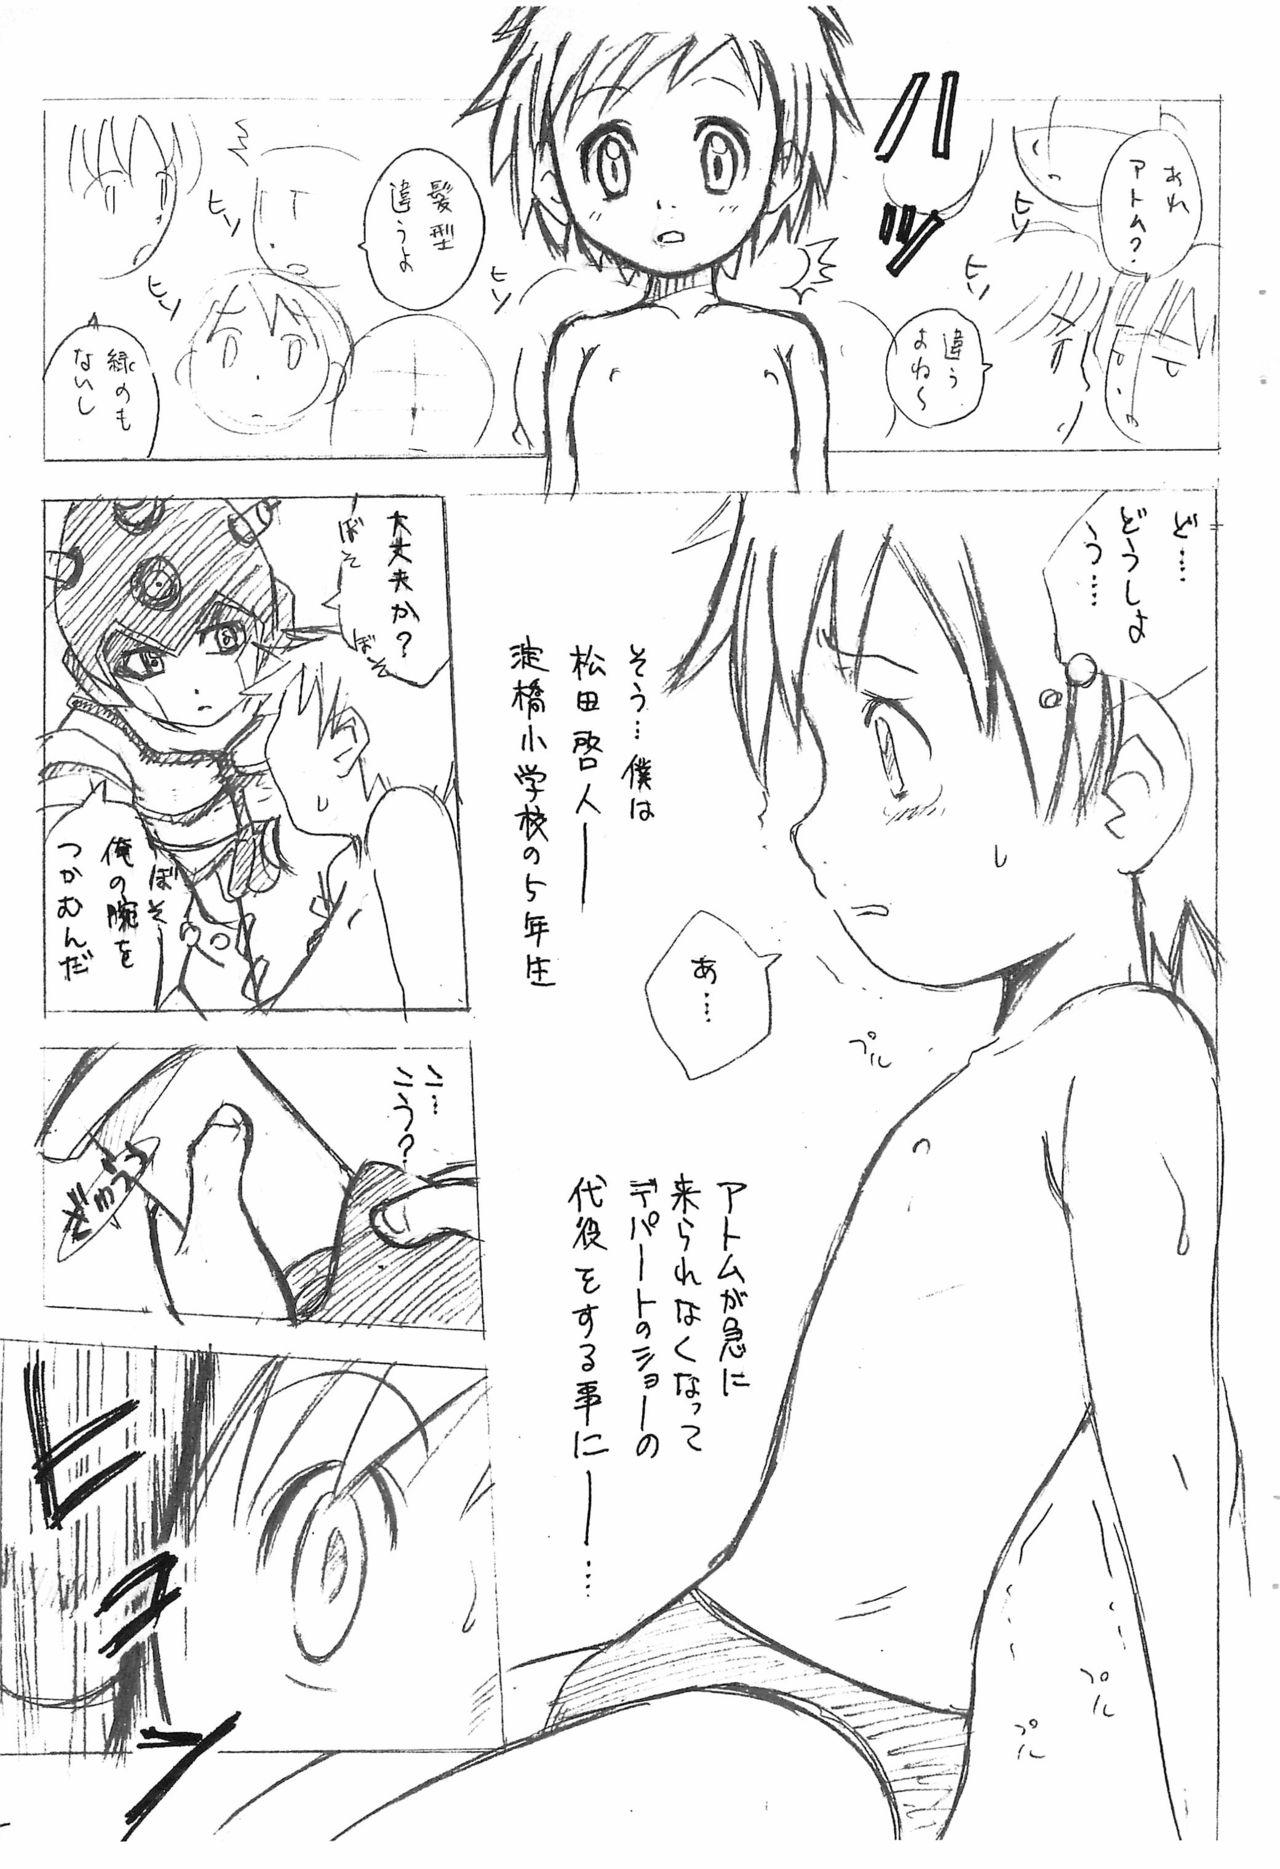 Huge Dick Tetsuwan Takato - Digimon tamers Astro boy Young Old - Page 5